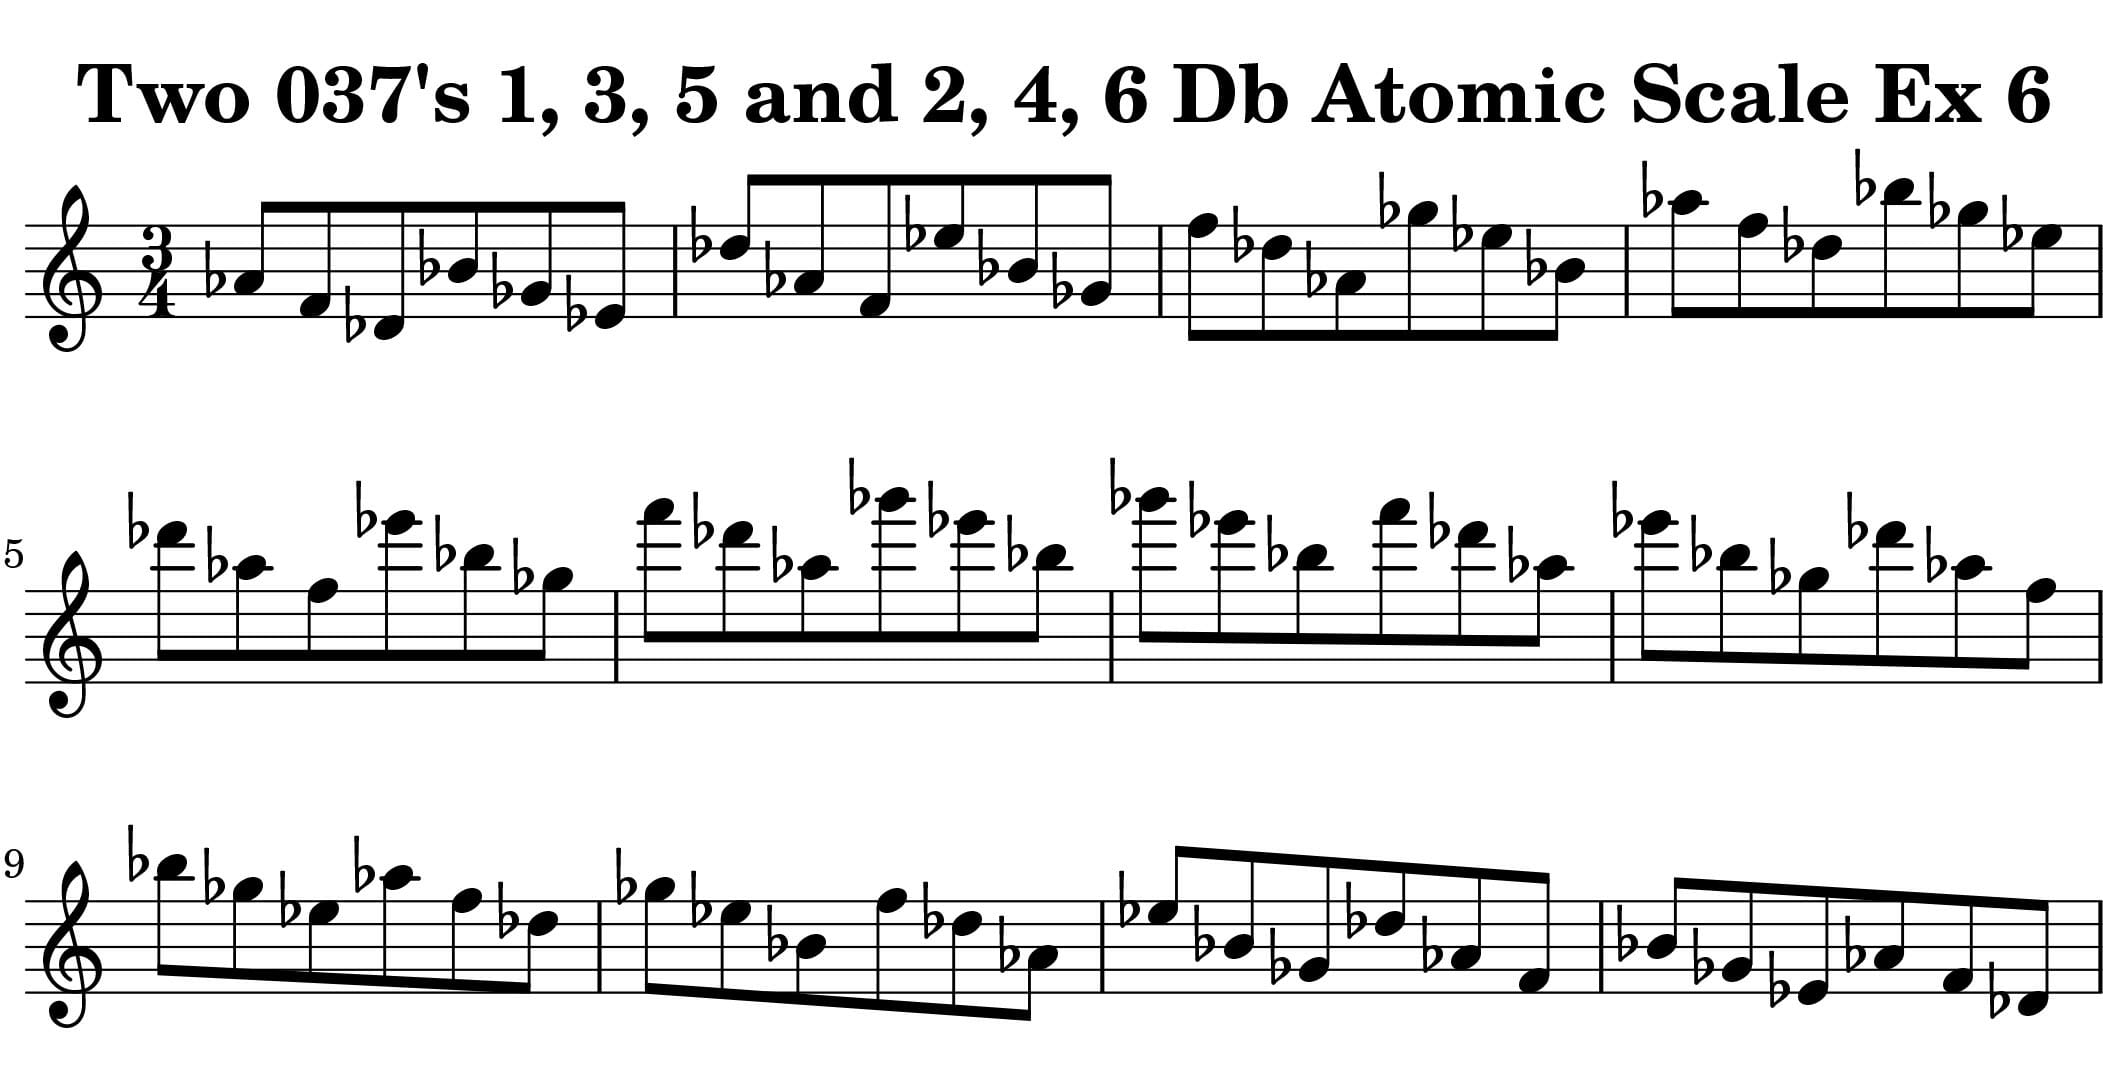 06-037-Degree-1-3-5-2-4-6-Atomic-Scale-Ex-6-Key-Db--Harmonic-and-Melodic-Equivalance-19A-Two-Triad-Pair-by-bruce-arnold-for-muse-eek-publishing-inc.